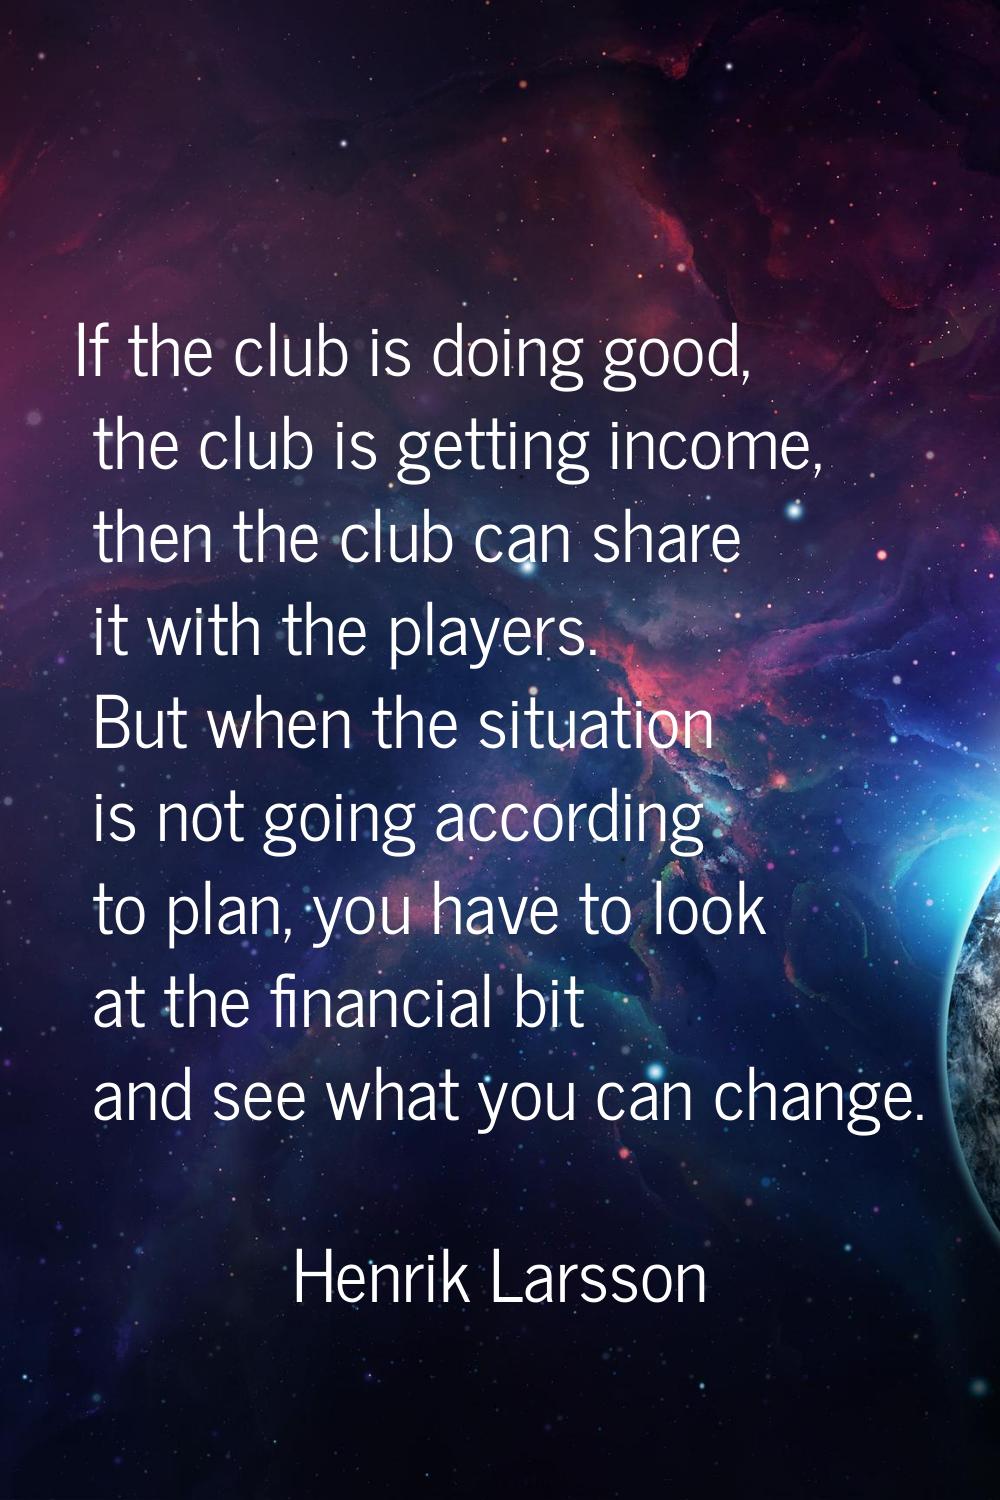 If the club is doing good, the club is getting income, then the club can share it with the players.